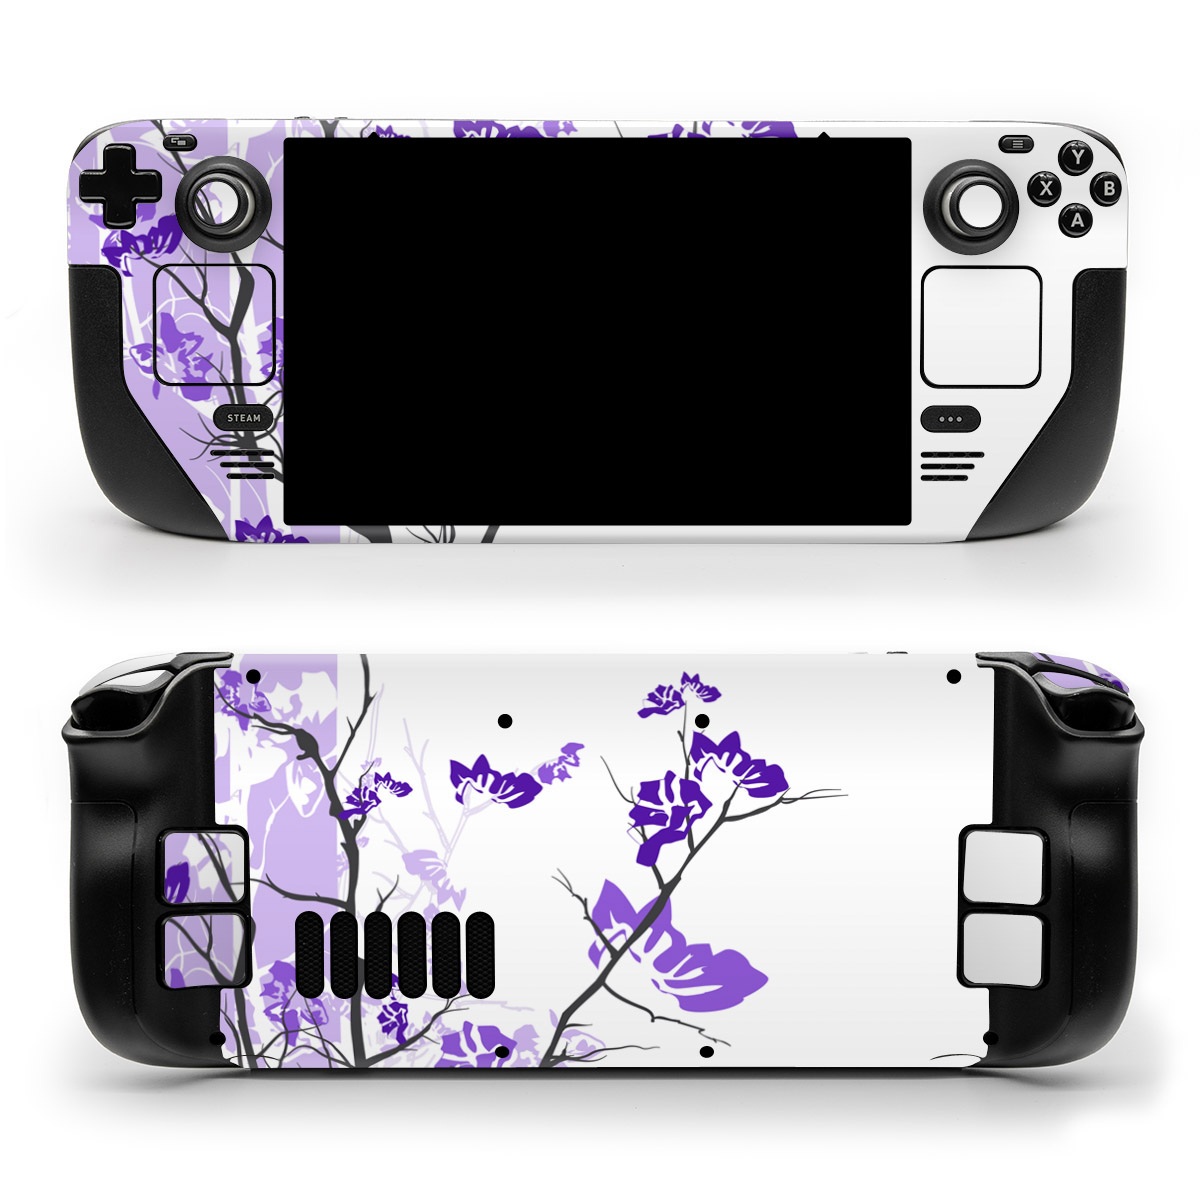 Valve Steam Deck Skin design of Branch, Purple, Violet, Lilac, Lavender, Plant, Twig, Flower, Tree, Wildflower, with white, purple, gray, pink, black colors